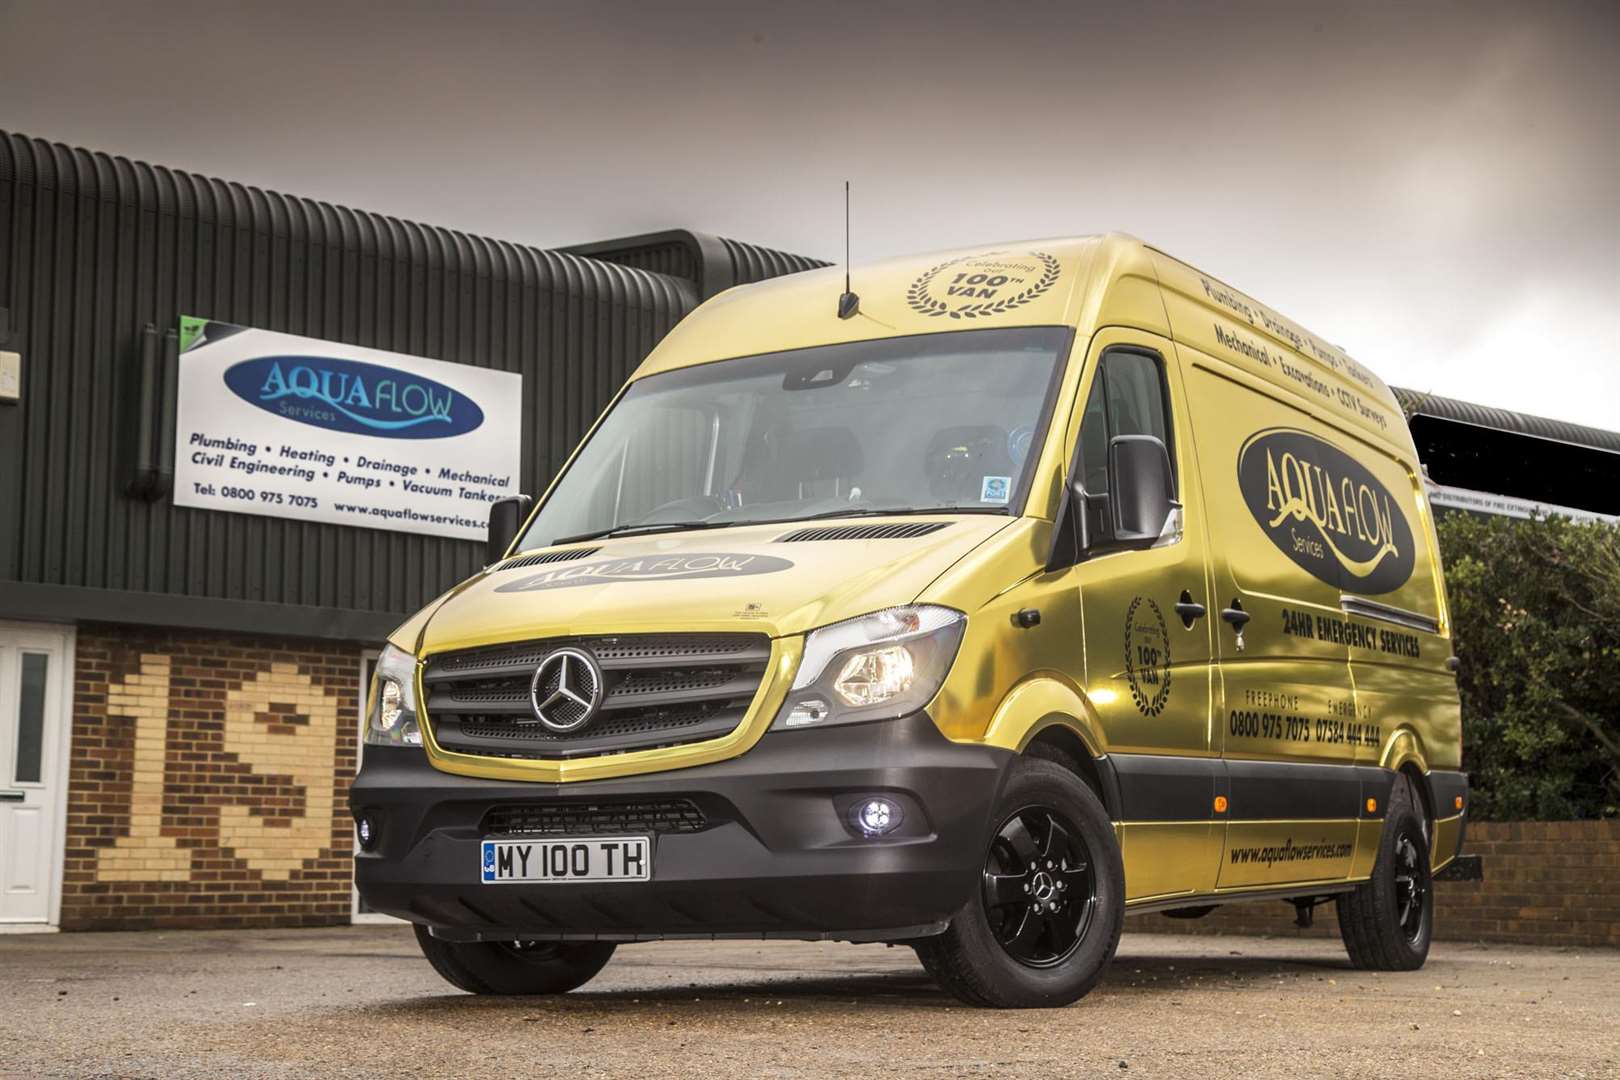 Sparshatts of Kent supplied Canterbury-based Aquaflow with its 100th Mercedes-Benz van and marked the occasion by giving it a gold livery